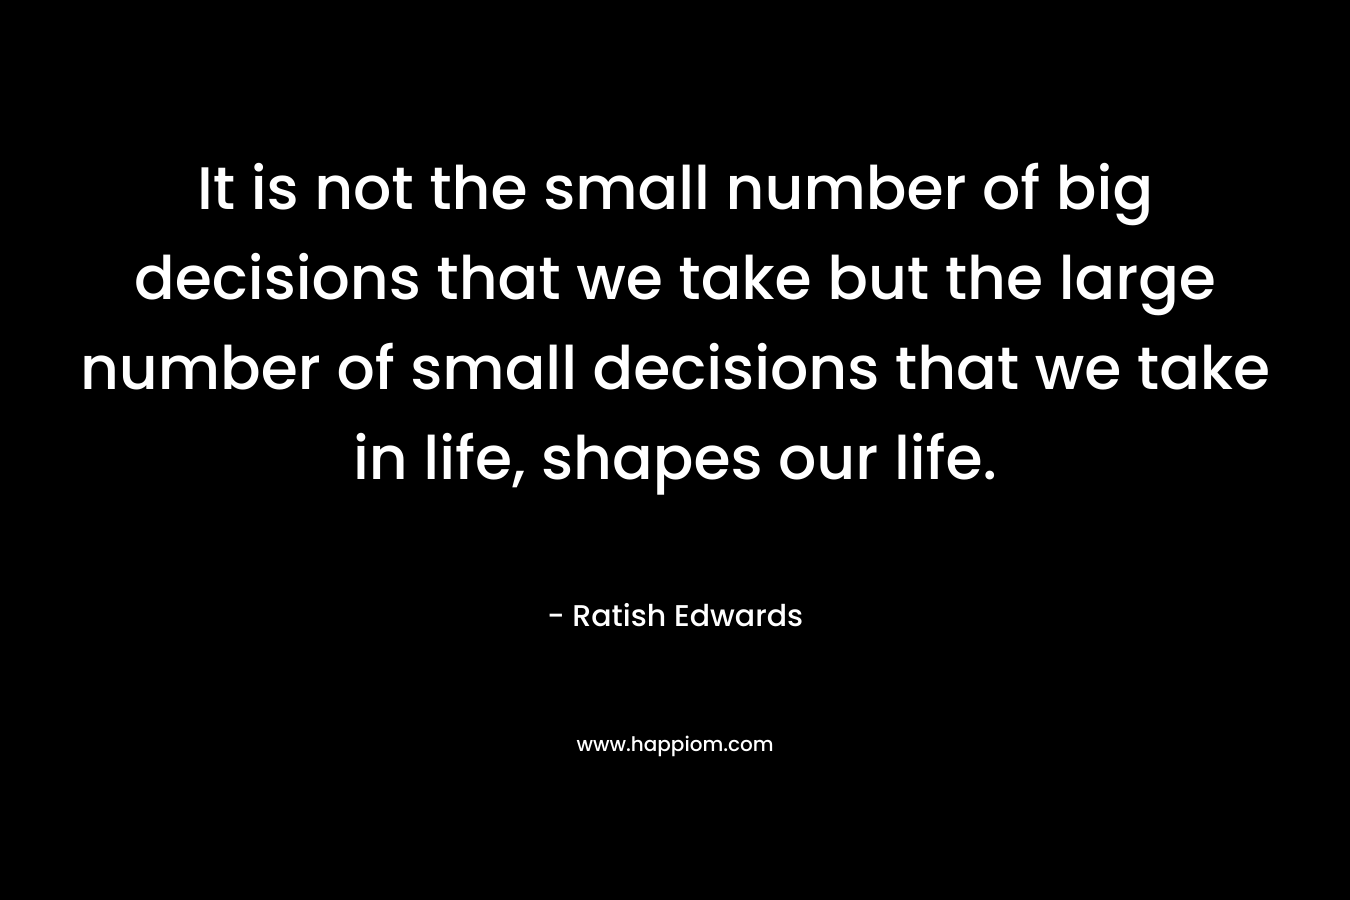 It is not the small number of big decisions that we take but the large number of small decisions that we take in life, shapes our life.